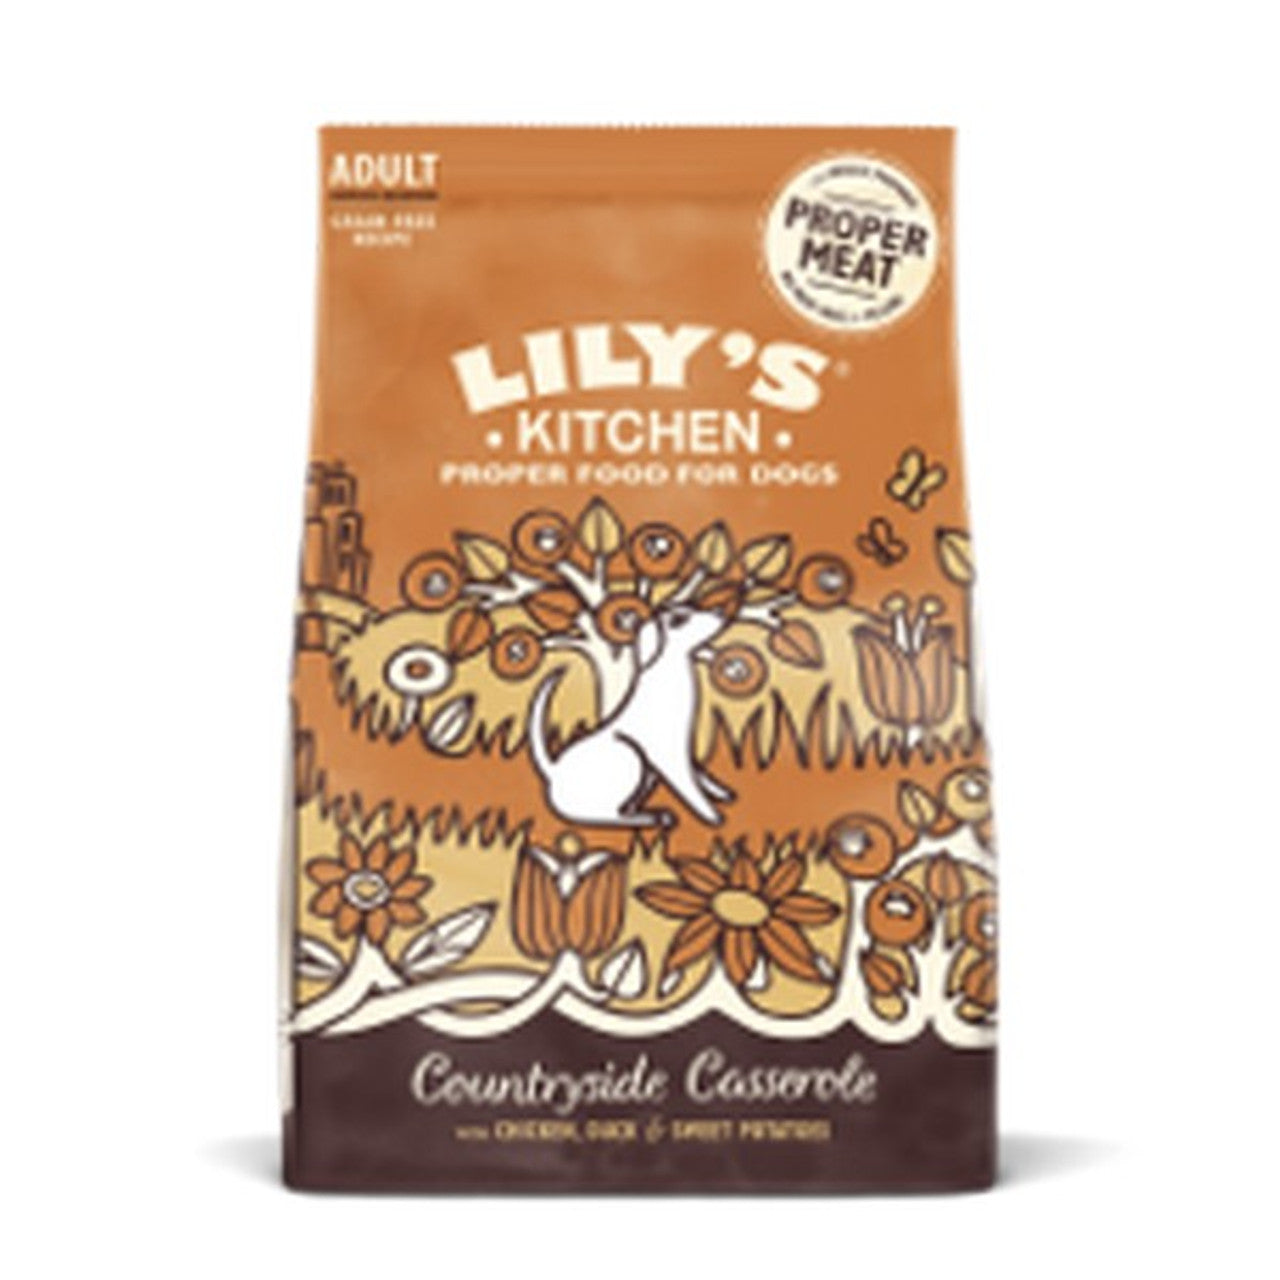 Lilys Kitchen Chicken and Duck Countryside Casserole Dry Dog Food 2.5kg